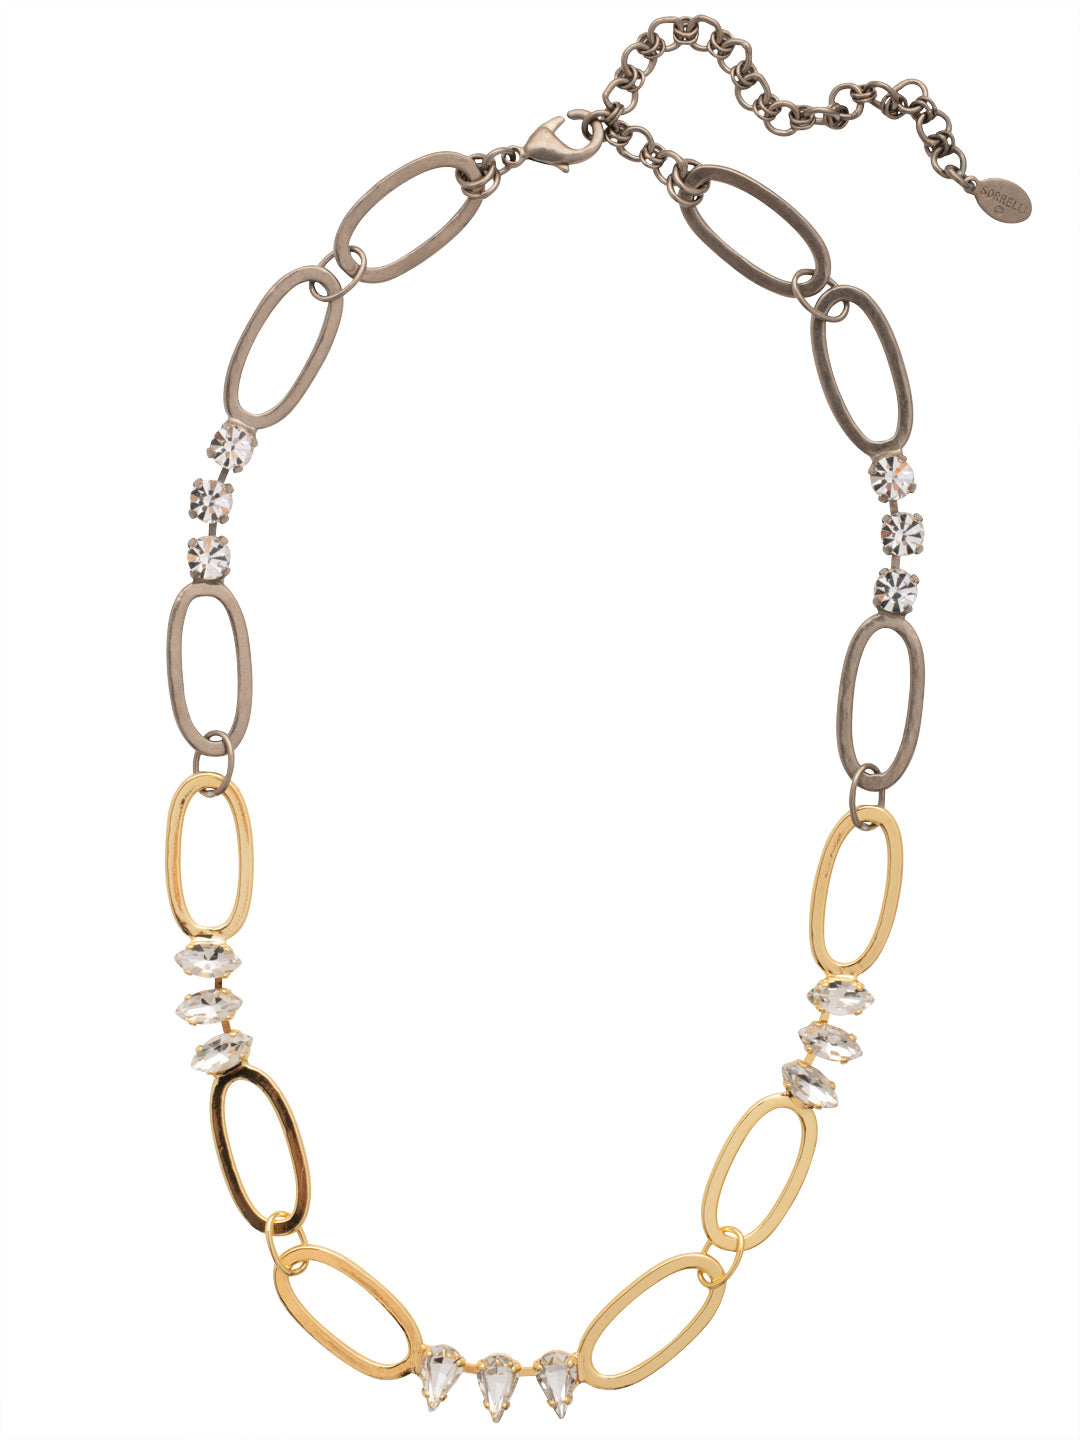 Gigi Tennis Necklace - 4NFC8MXCRY - <p>The Gigi Tennis Necklace features mixed metal oval chain links and navette crystals on an adjustable chain, secured by a lobster claw clasp. From Sorrelli's Crystal collection in our Mixed Metal finish.</p>